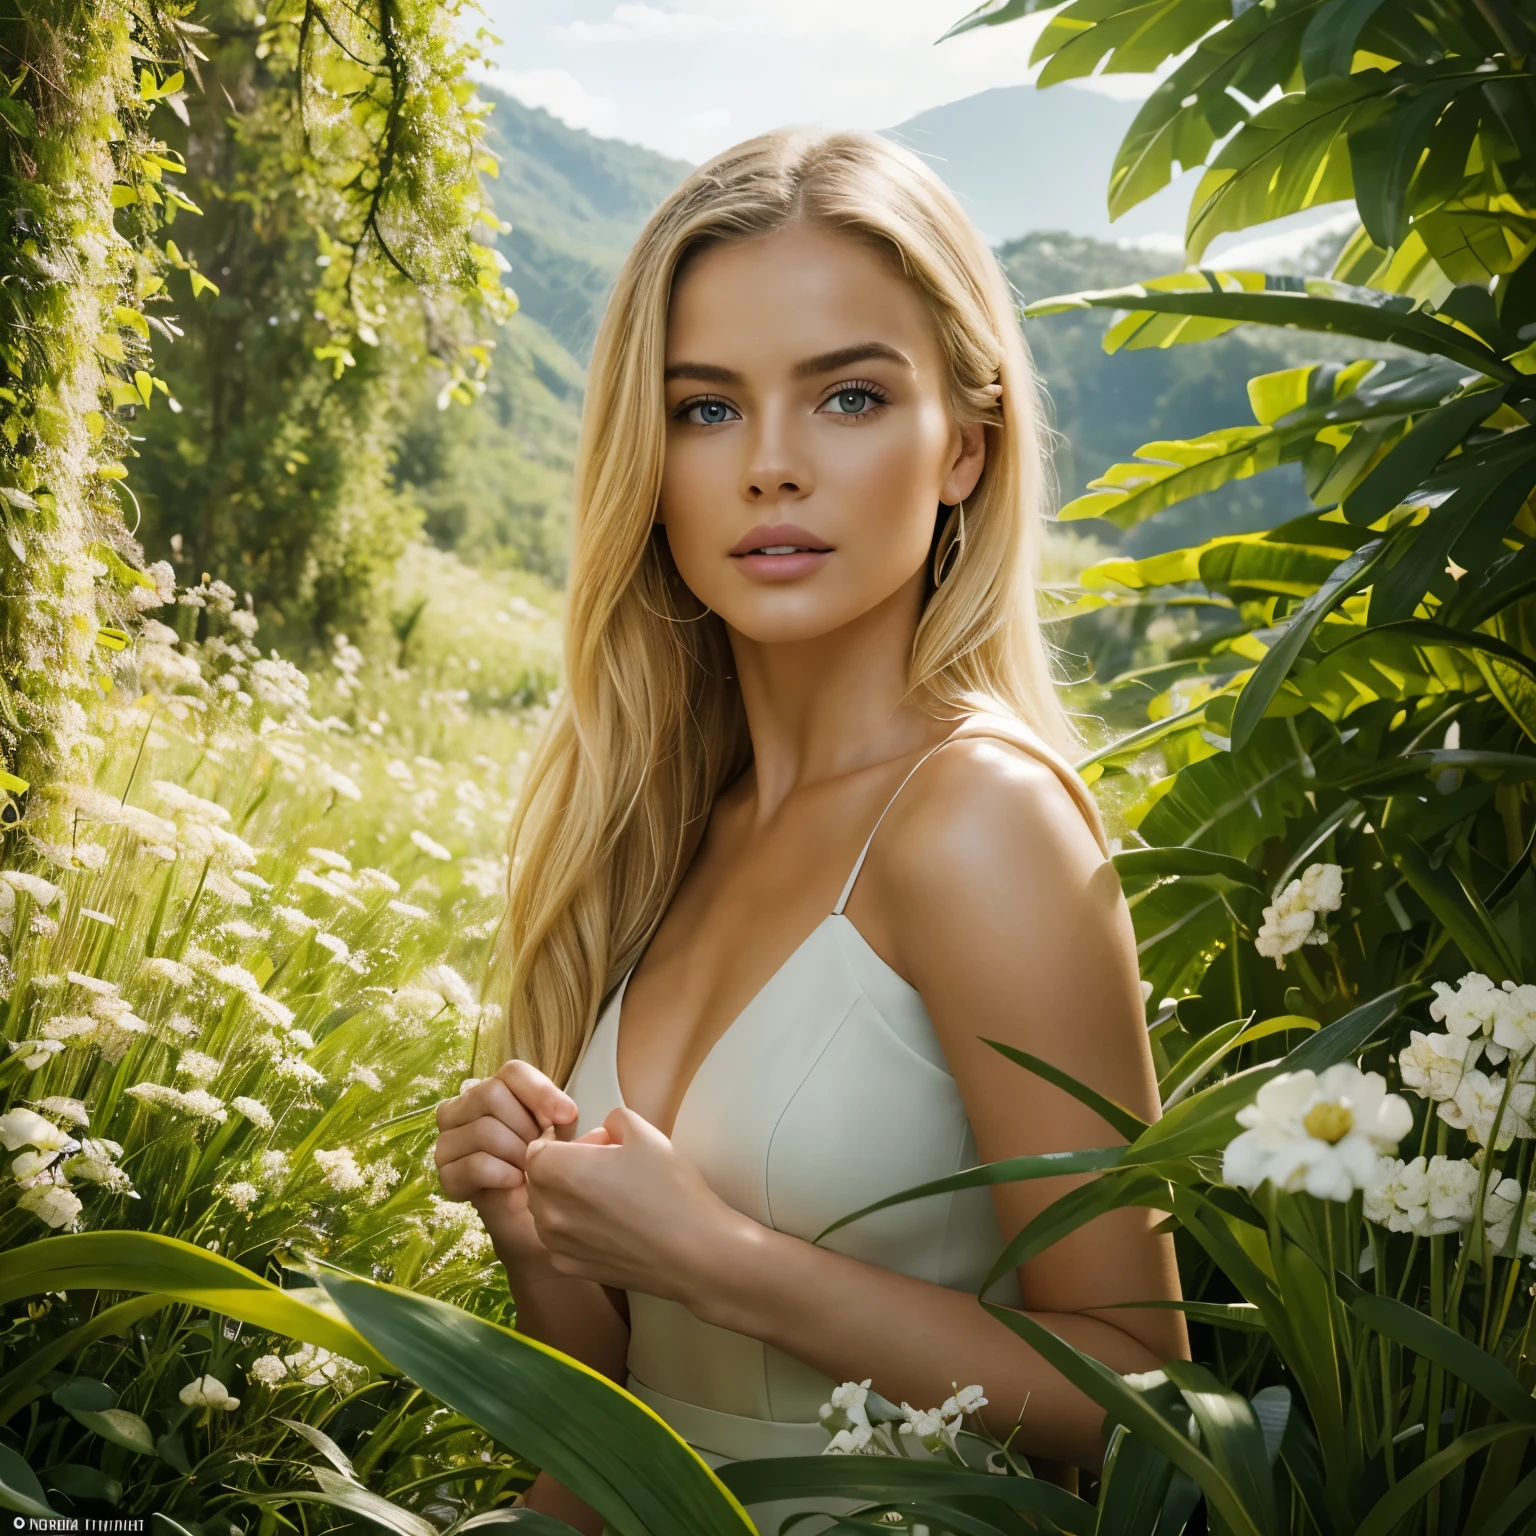 Hyper-realistic action scene in which a beautiful blonde woman closely examines the flora and fauna of a fantastic landscape. "Add extremely precise details to plants, Animales, And the seductive expression on the girl's face, 8k, CinematicLight, foto realista, Renderizado de octanaje, centrado, obra maestra, 35mm,